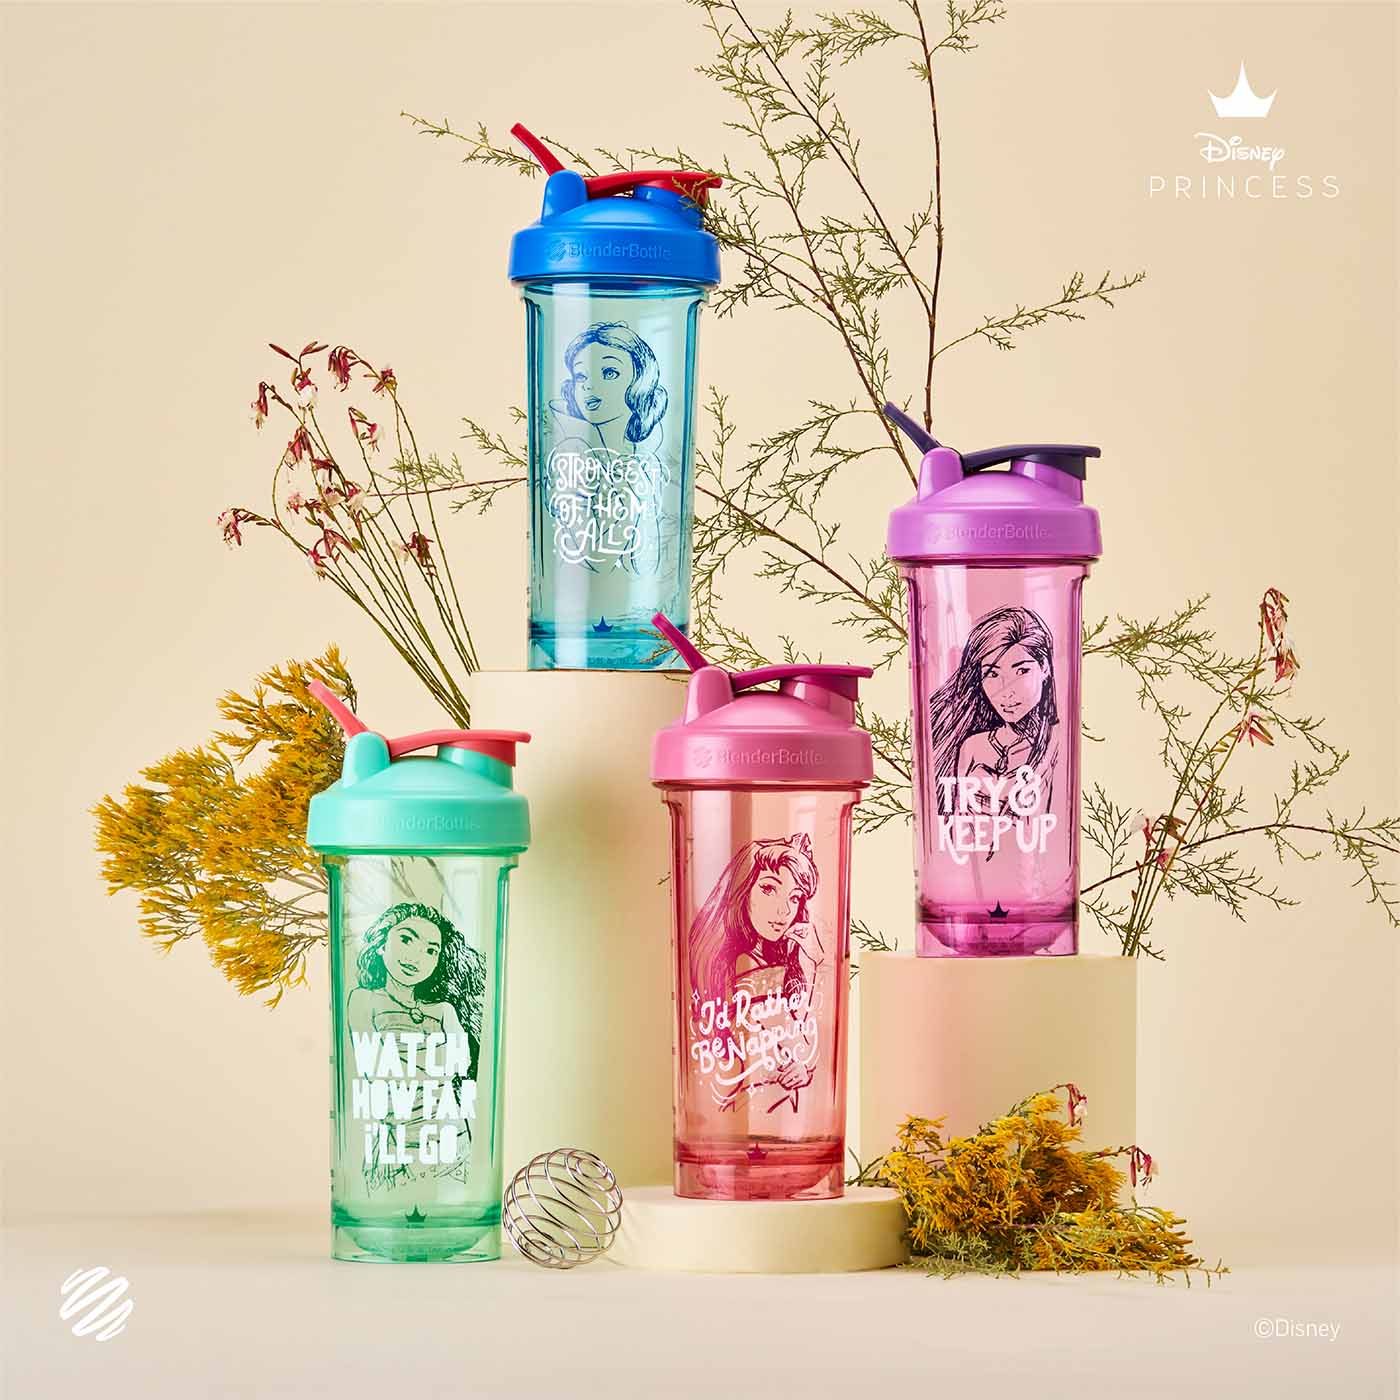 BlenderBottle princess shaker cups featuring Moana, Pocahontas, Aurora, and Snow White on a neutral background.